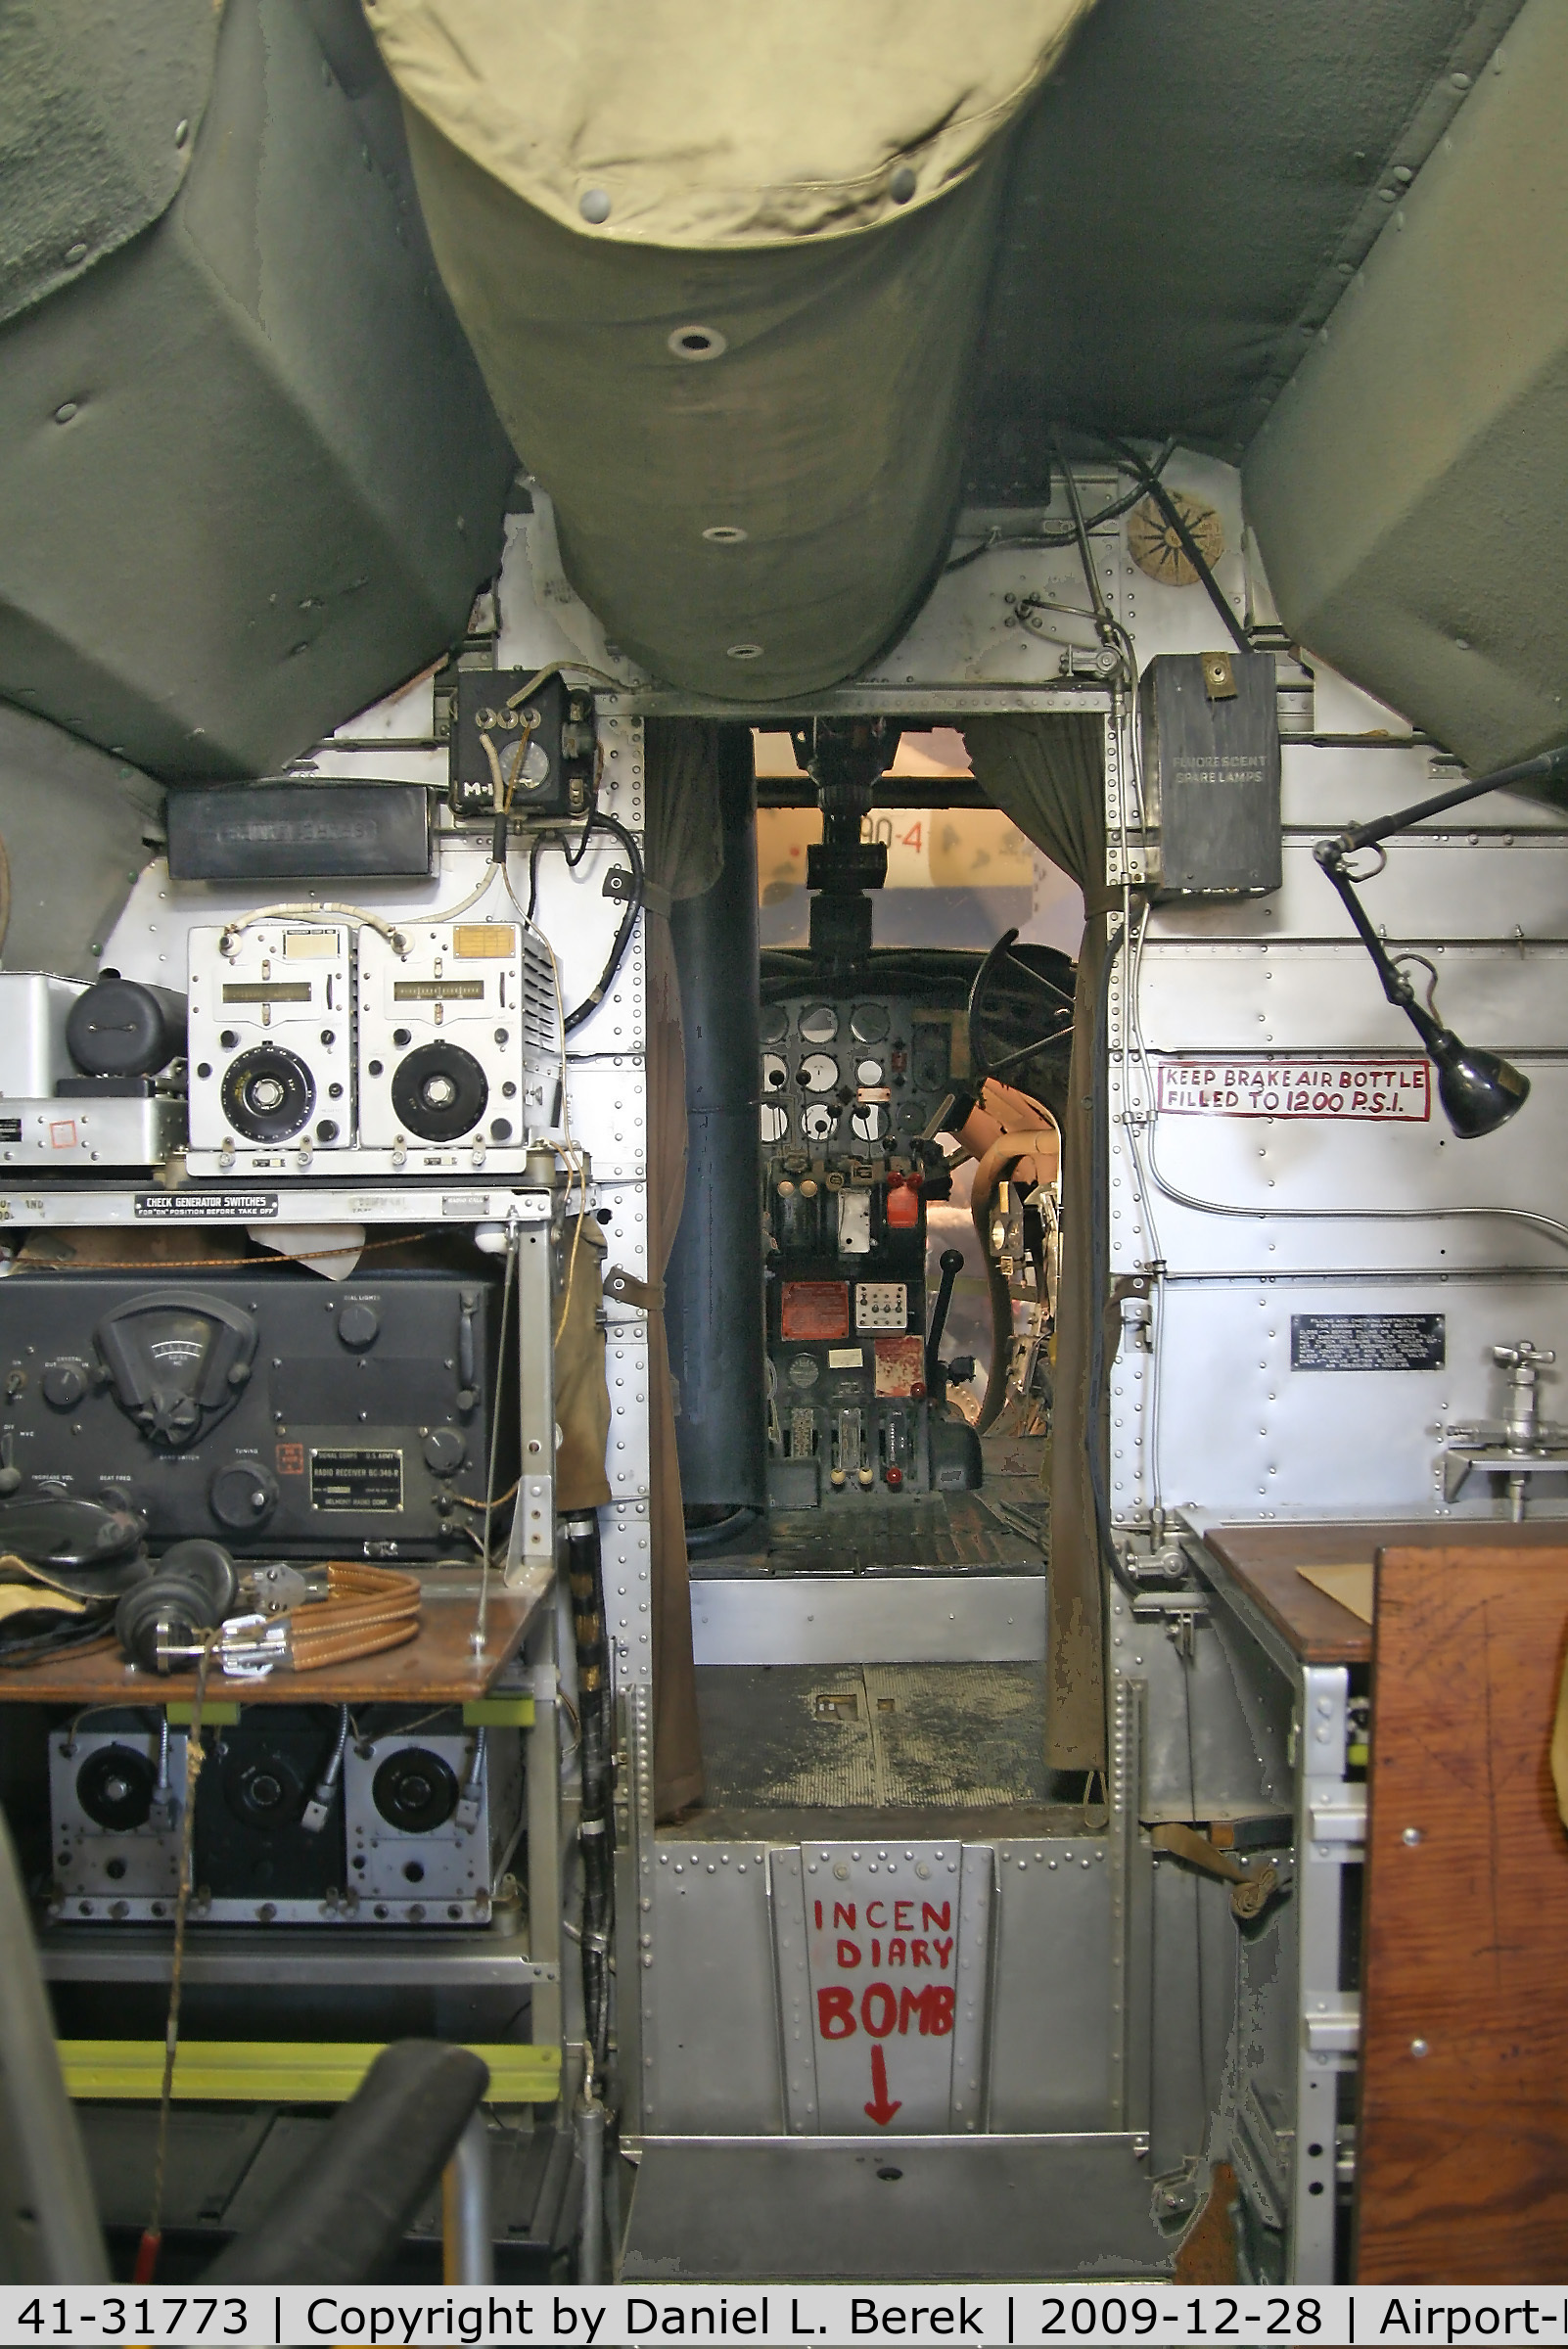 41-31773, 1941 Martin B-26B Marauder C/N 3487, This is the interior of the forward fuselage section of this preserved WWII bomber.